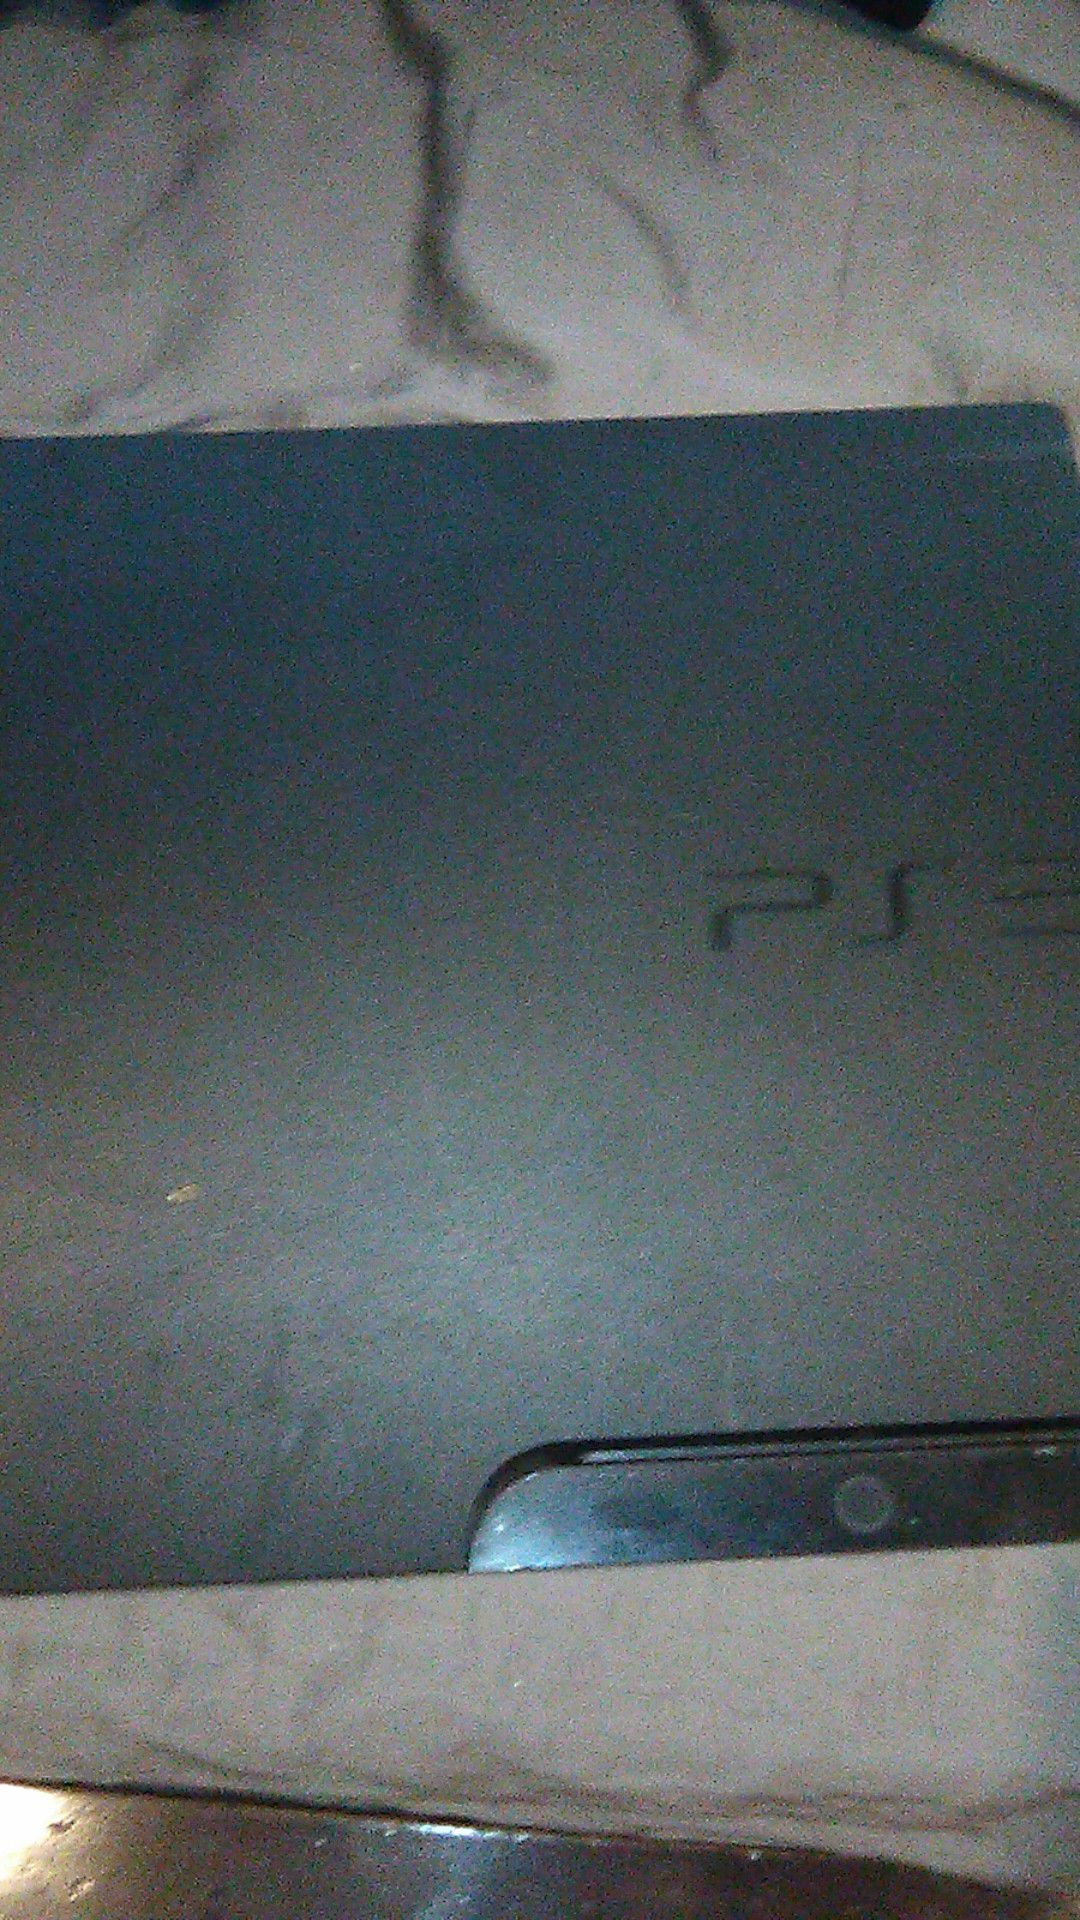 PS3 (just console)